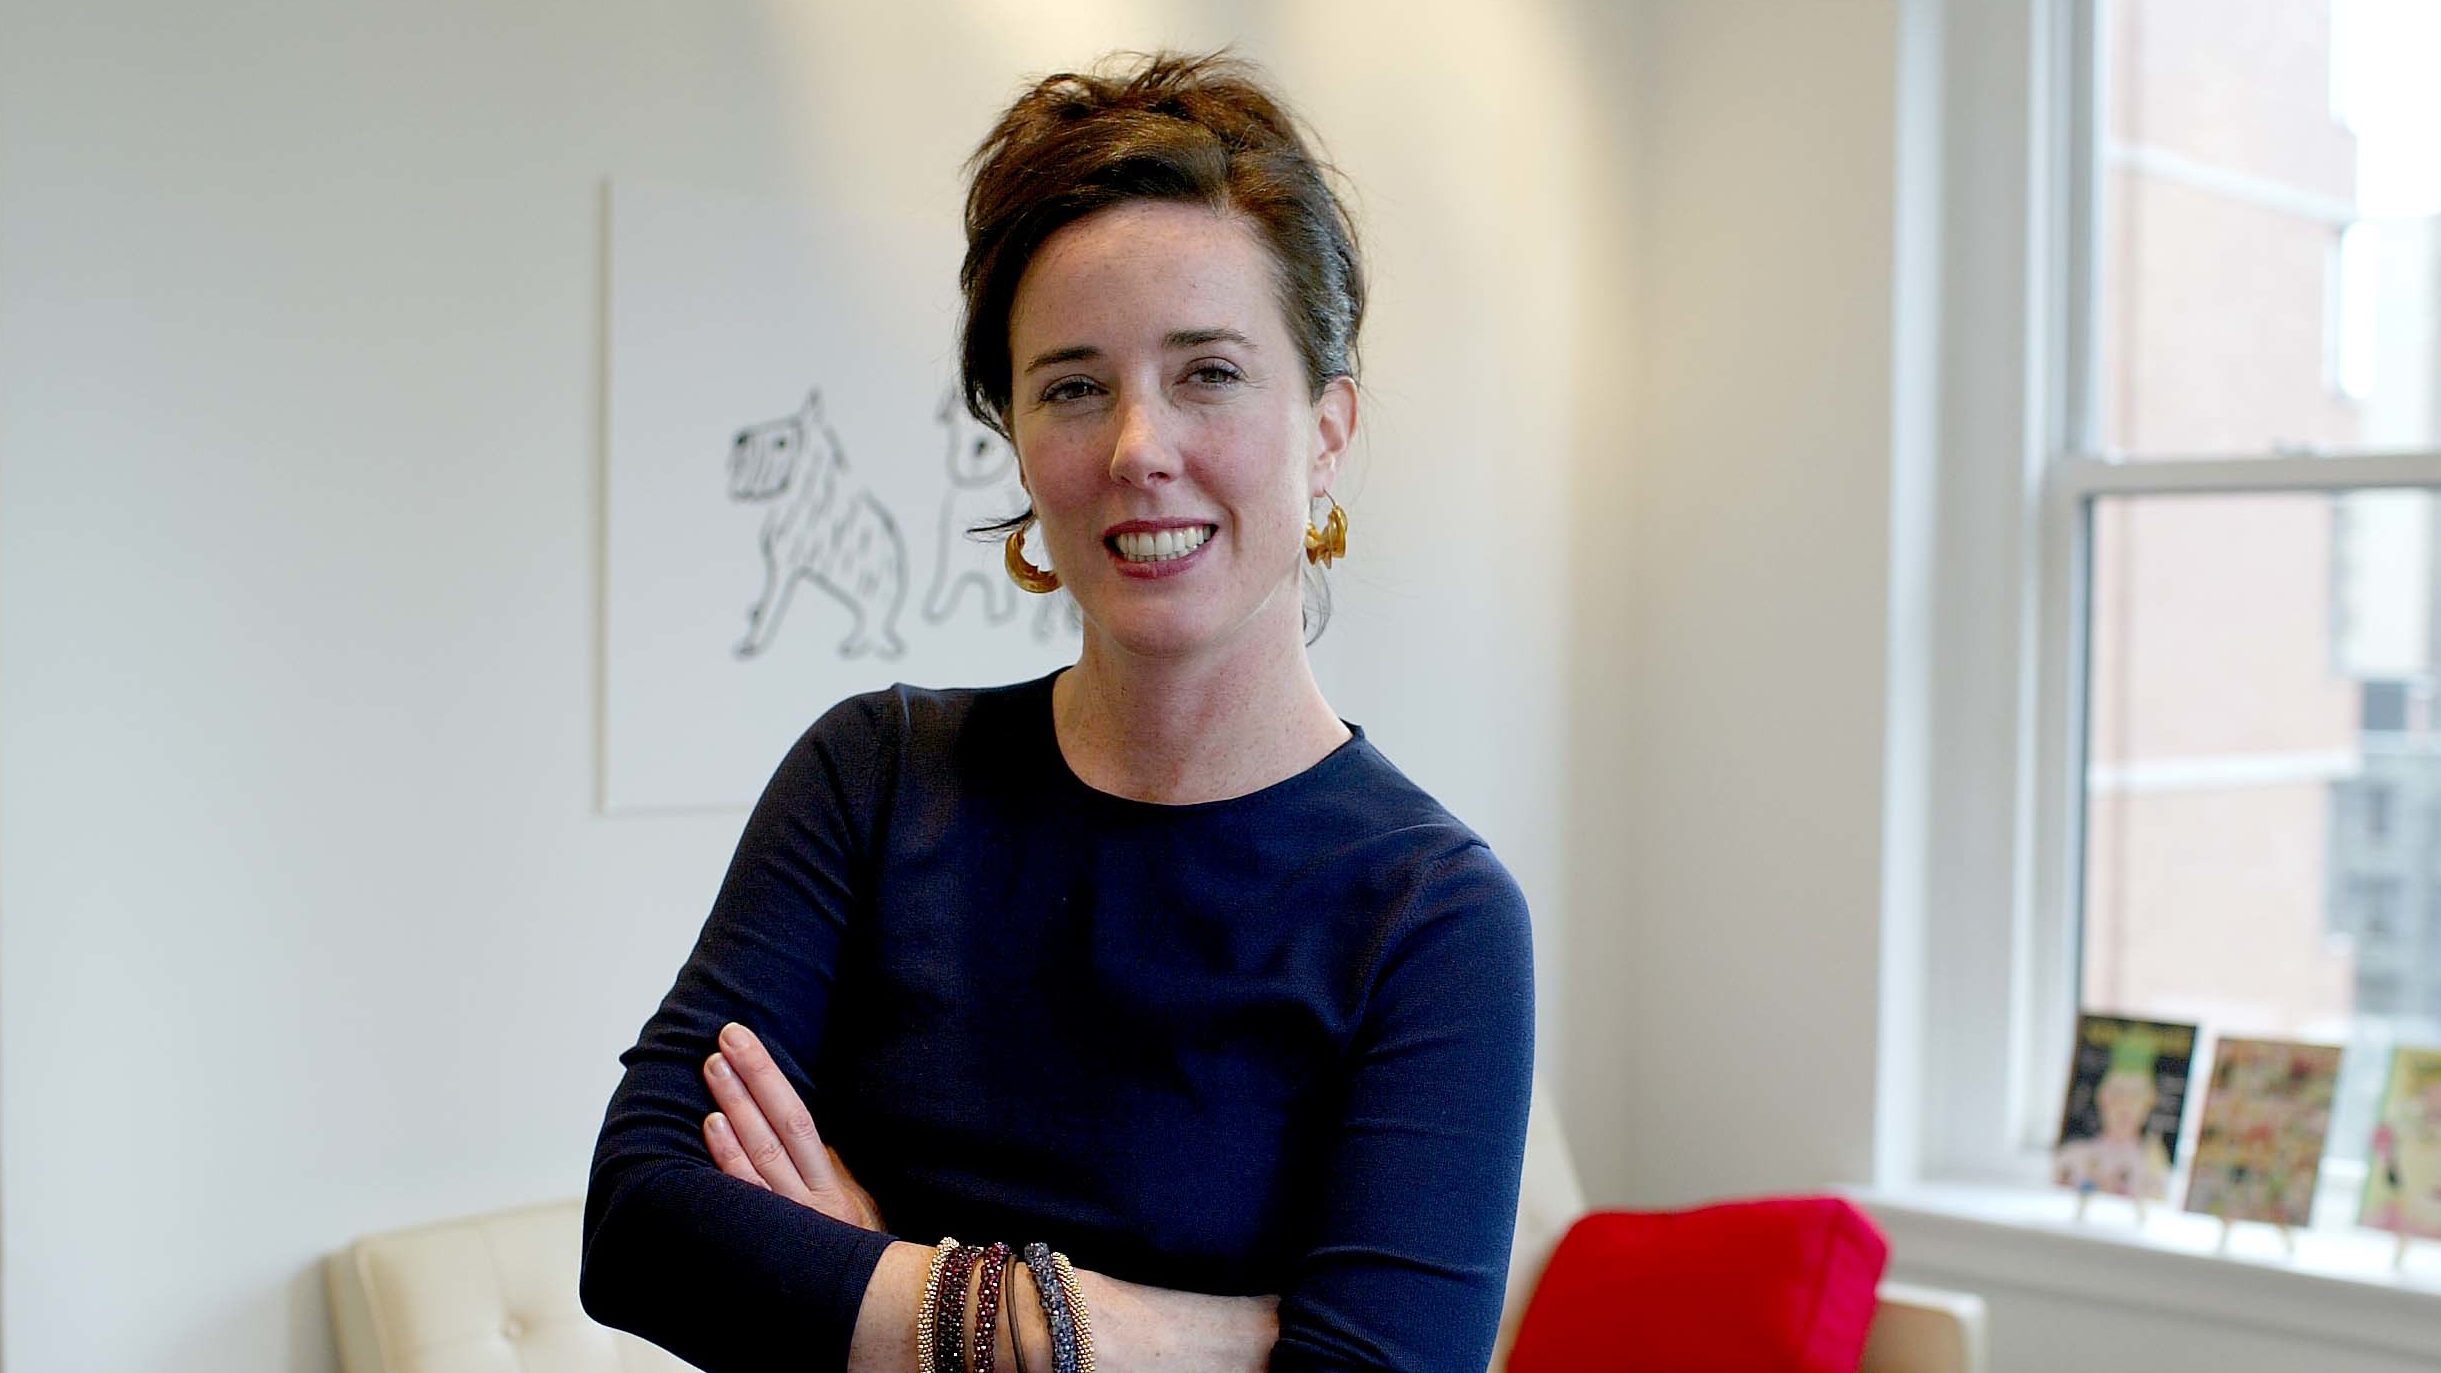 Kate Spade Best Friend Pens Essay on Her Legacy 1 Year After Death